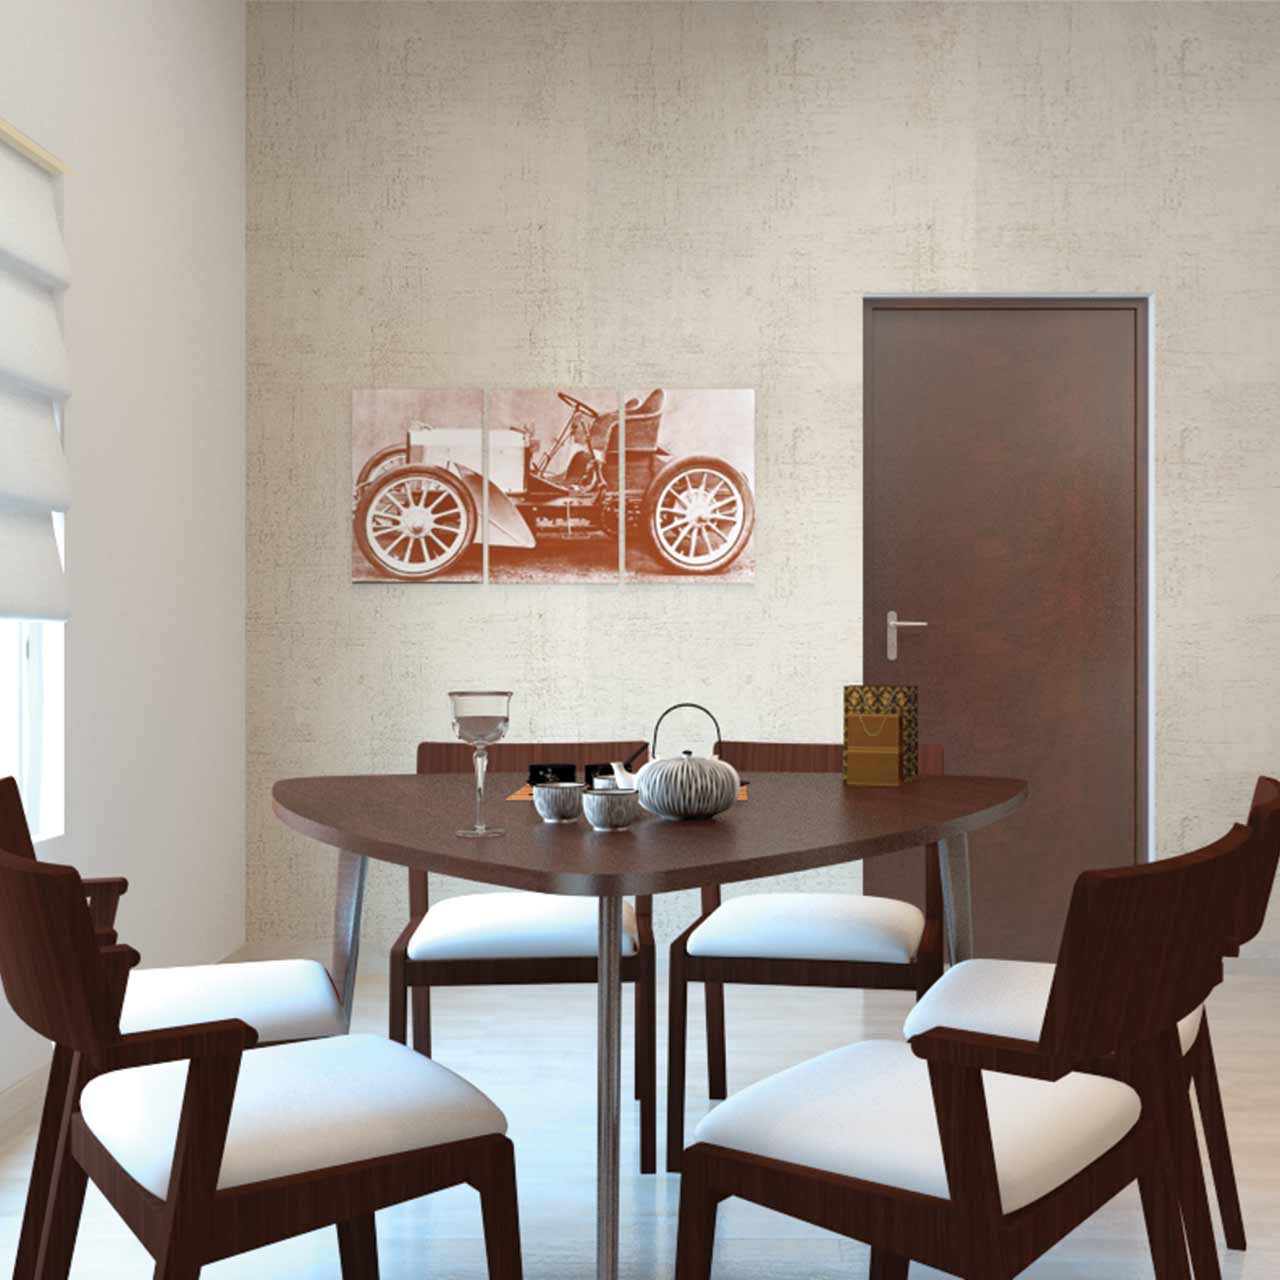 Dining room decor to carry forward the design style of your dining table to the seating with these dining room decor ideas 